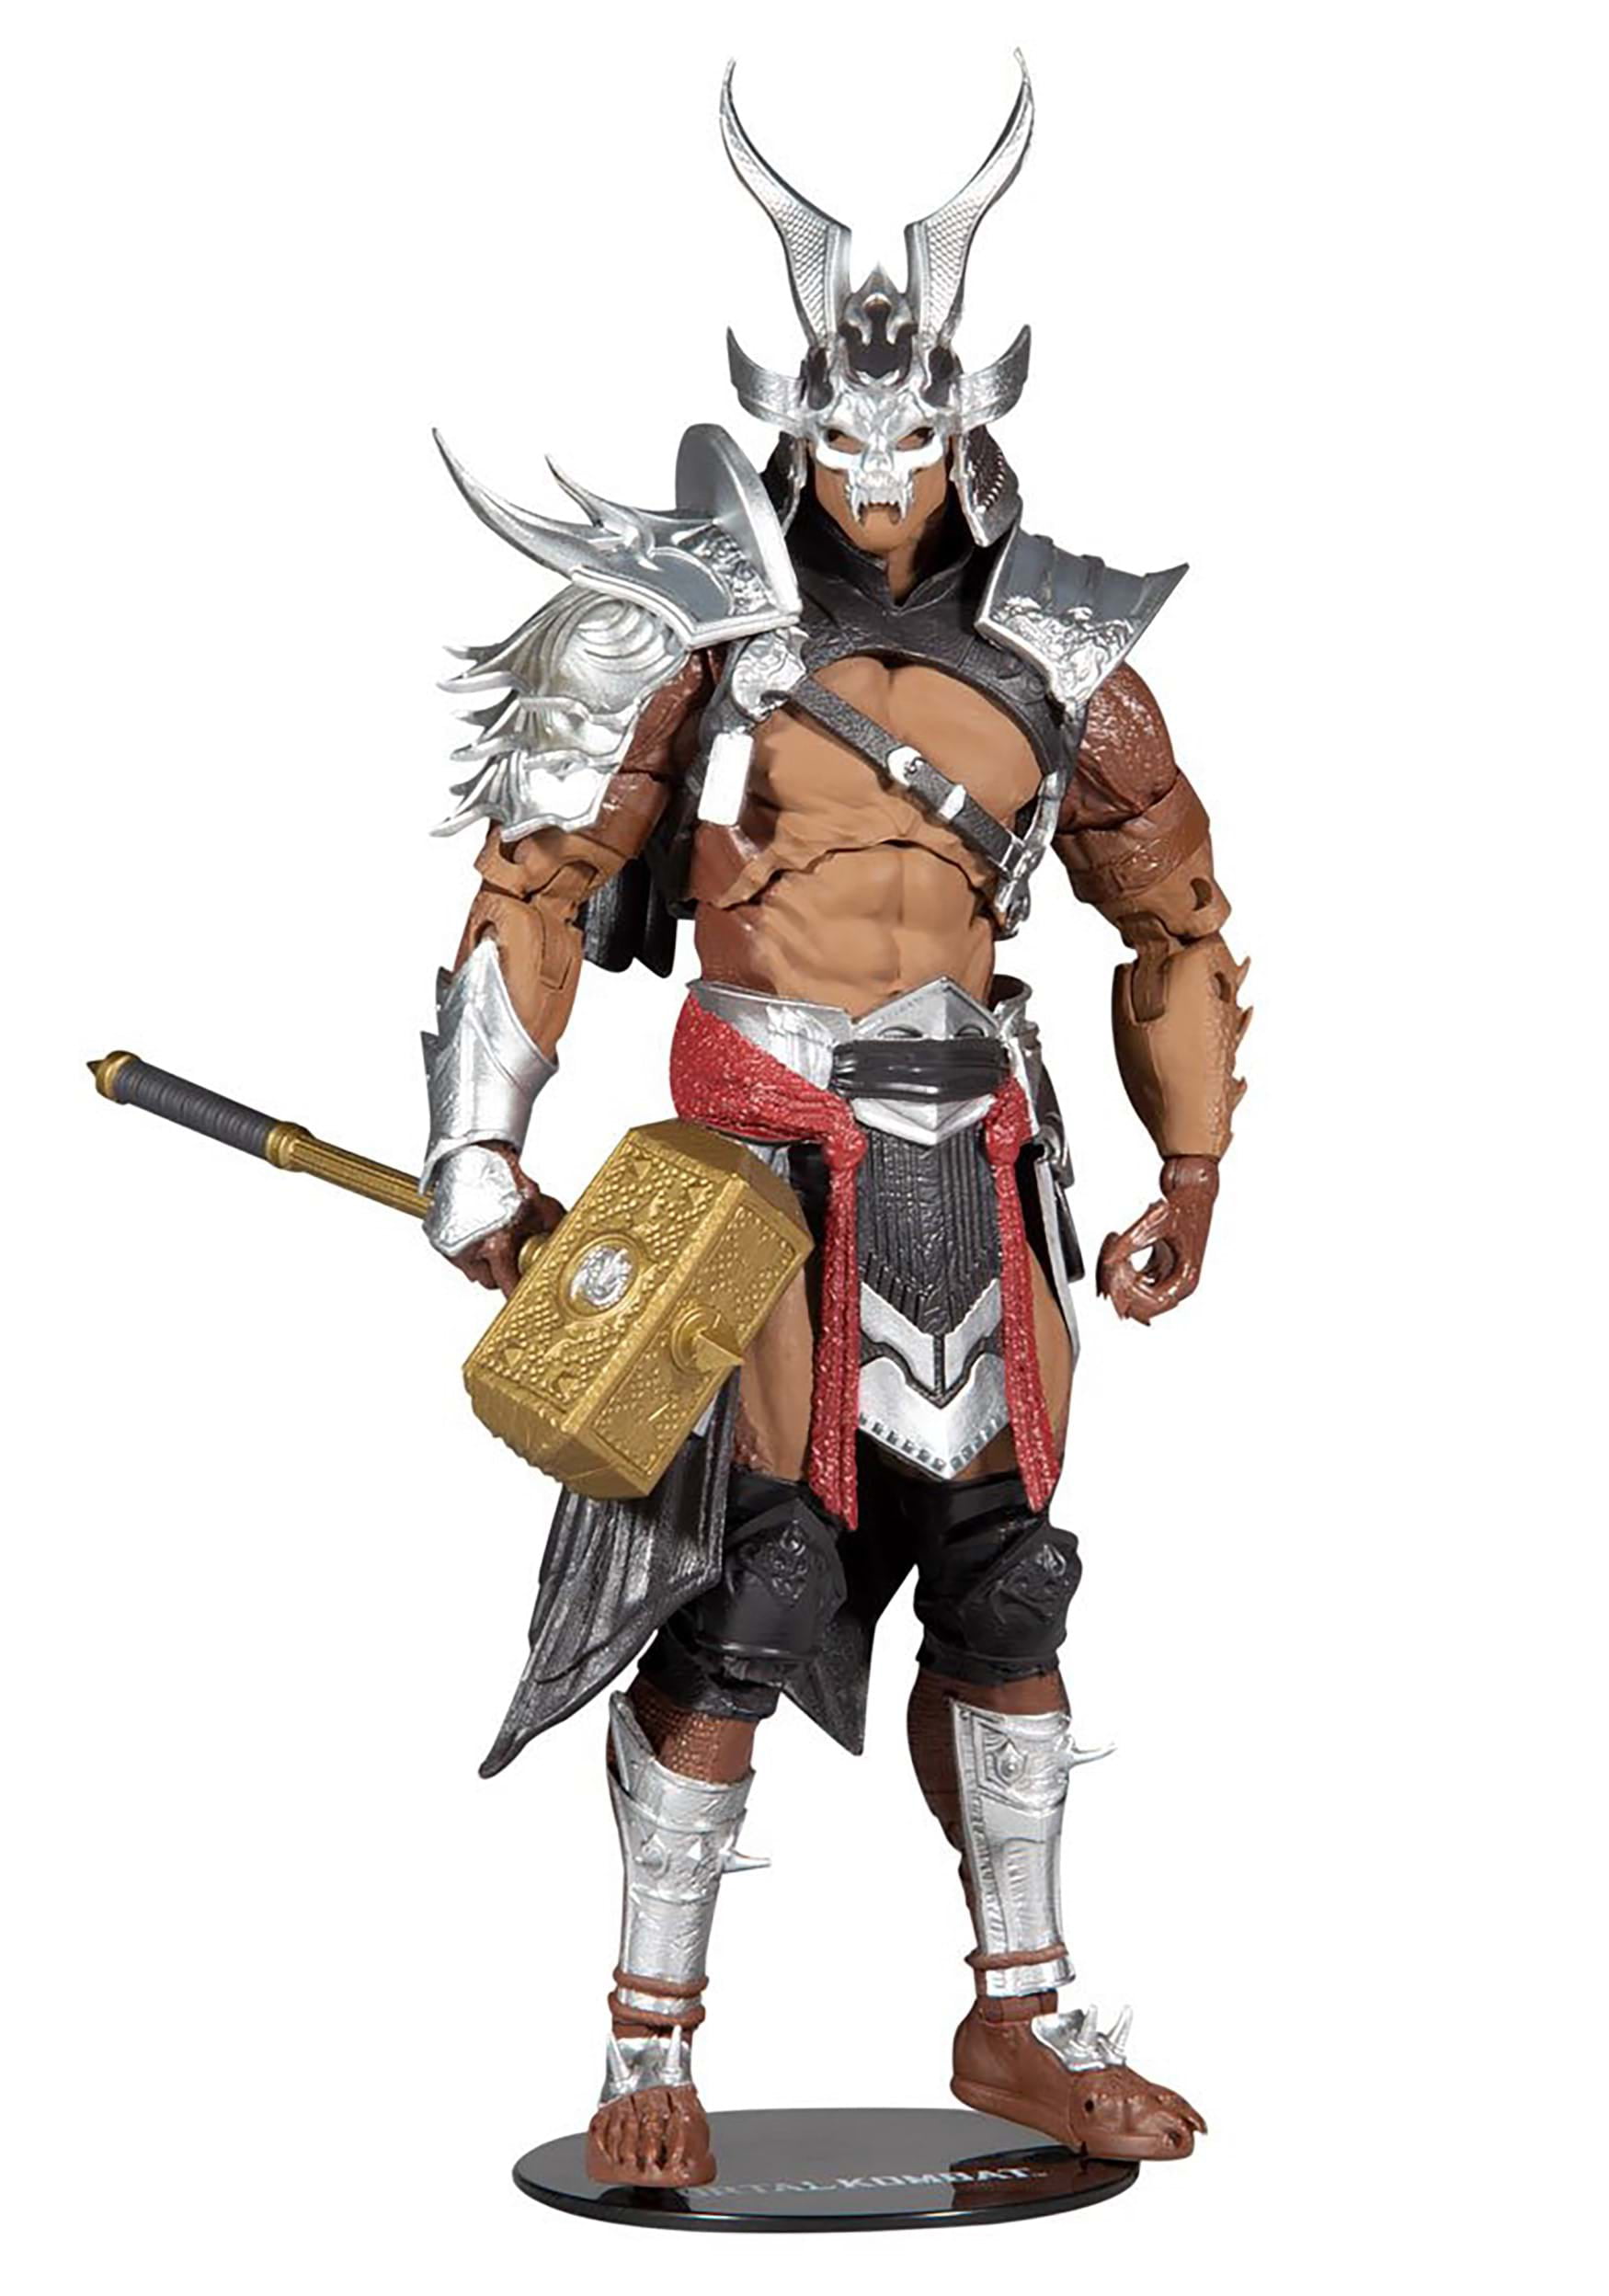 11037-1 for sale online McFarlane Shao Khan 7 inch Action Figure 